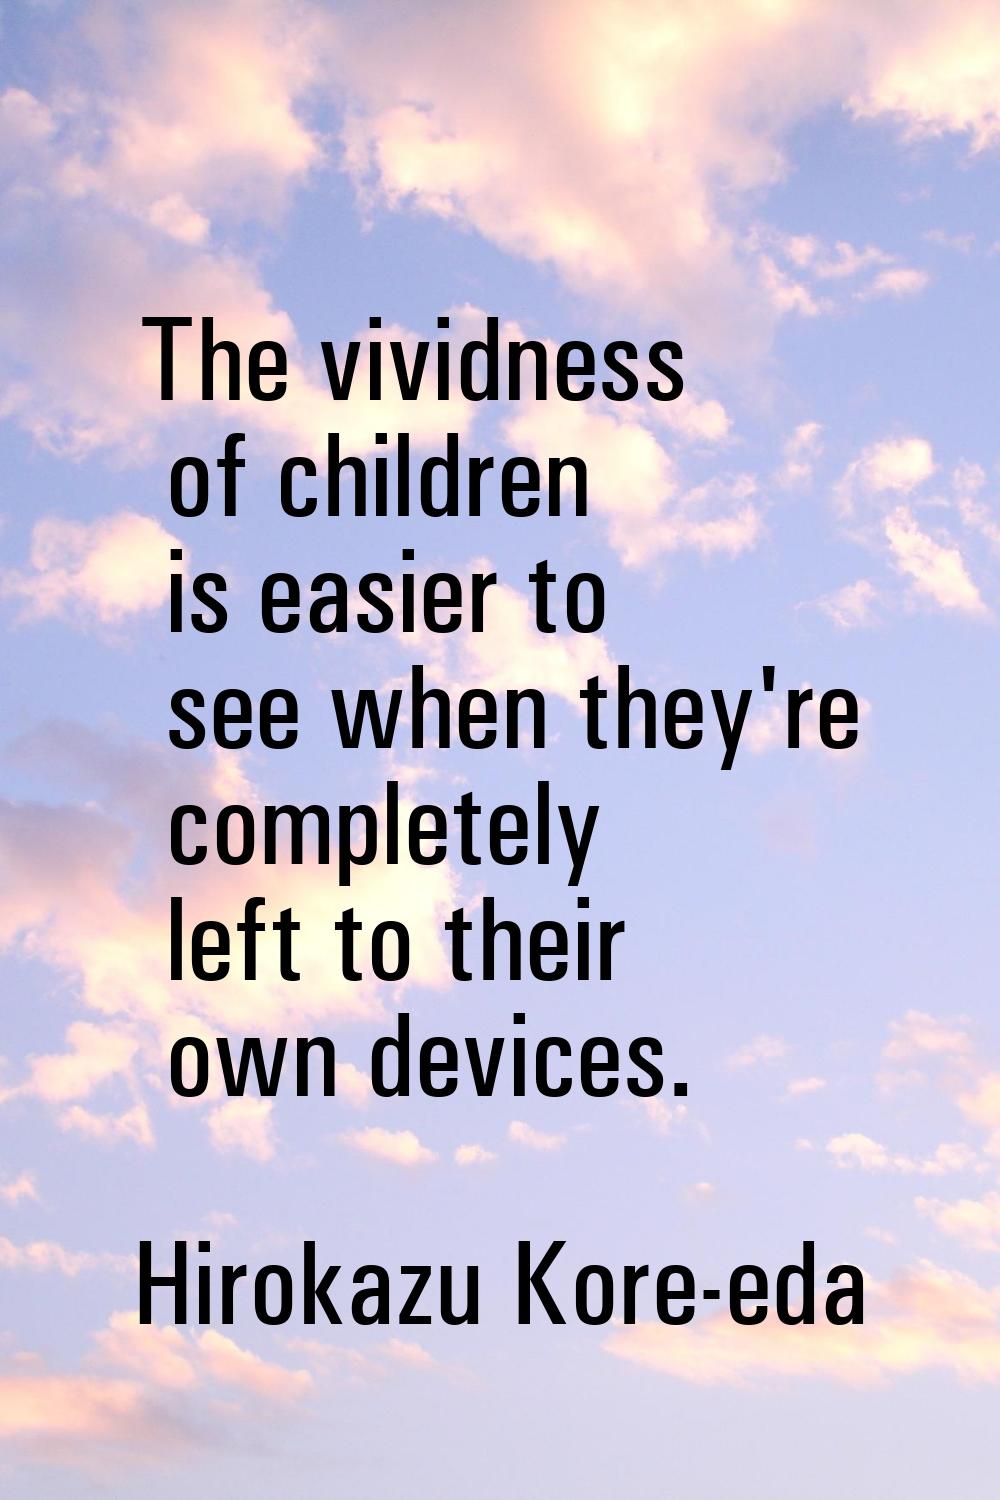 The vividness of children is easier to see when they're completely left to their own devices.